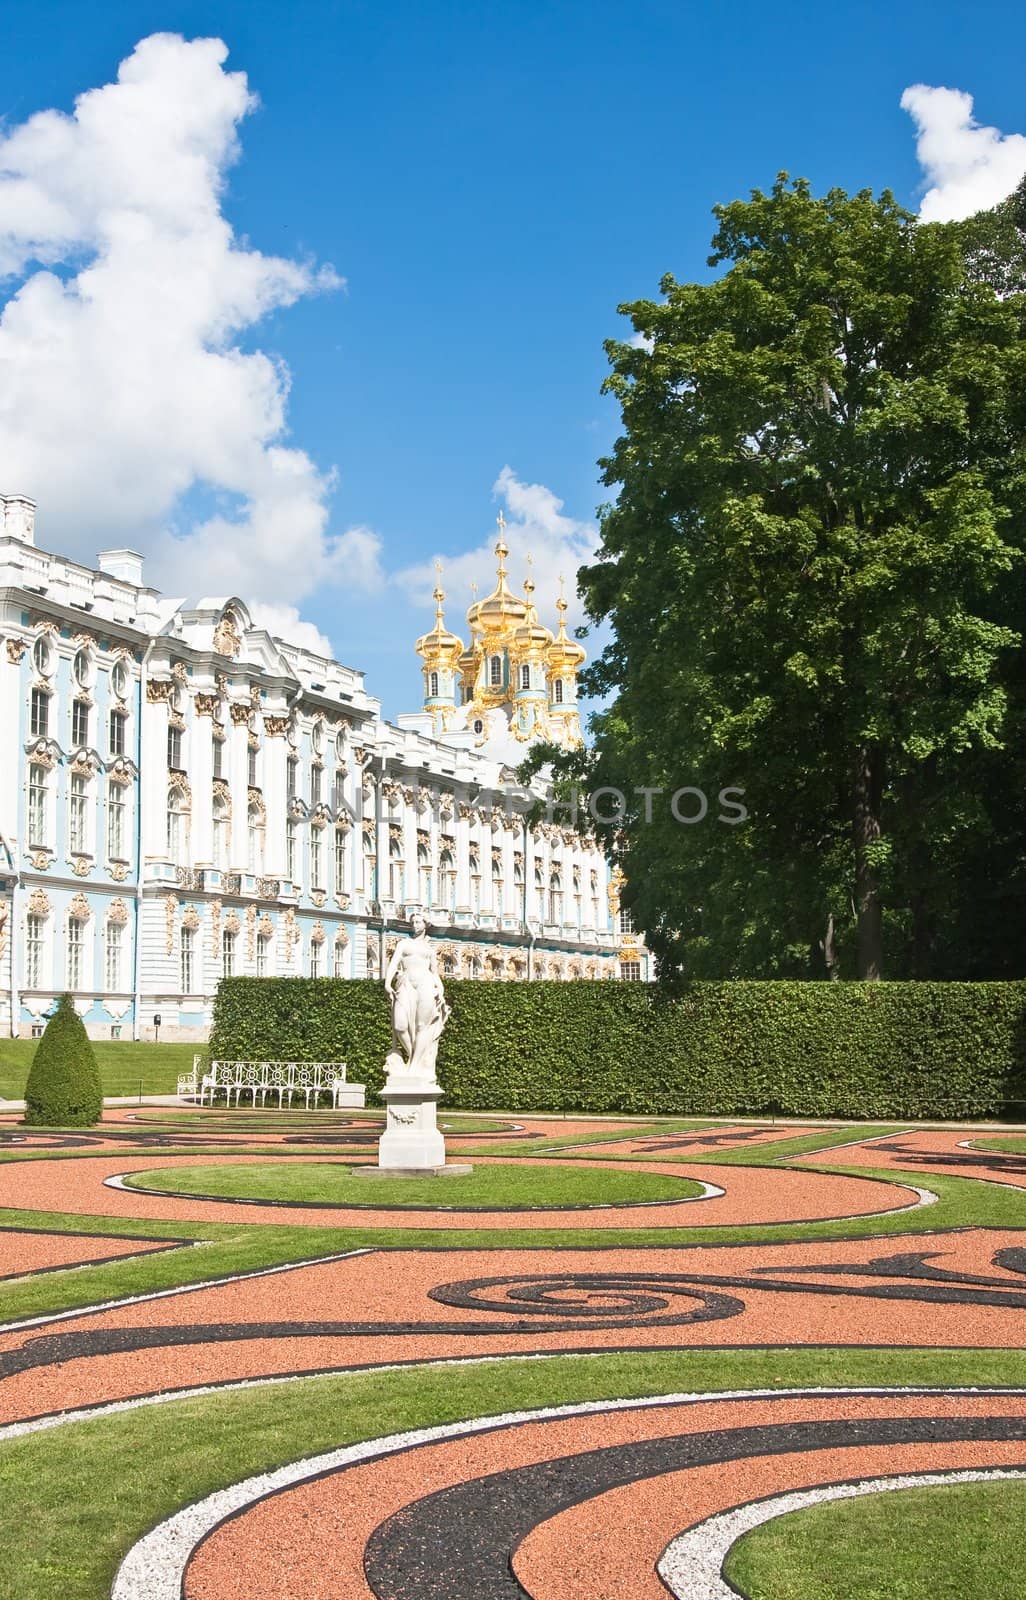 The Catherine Palace, located in the town of Tsarskoye Selo (Pus by nikolpetr